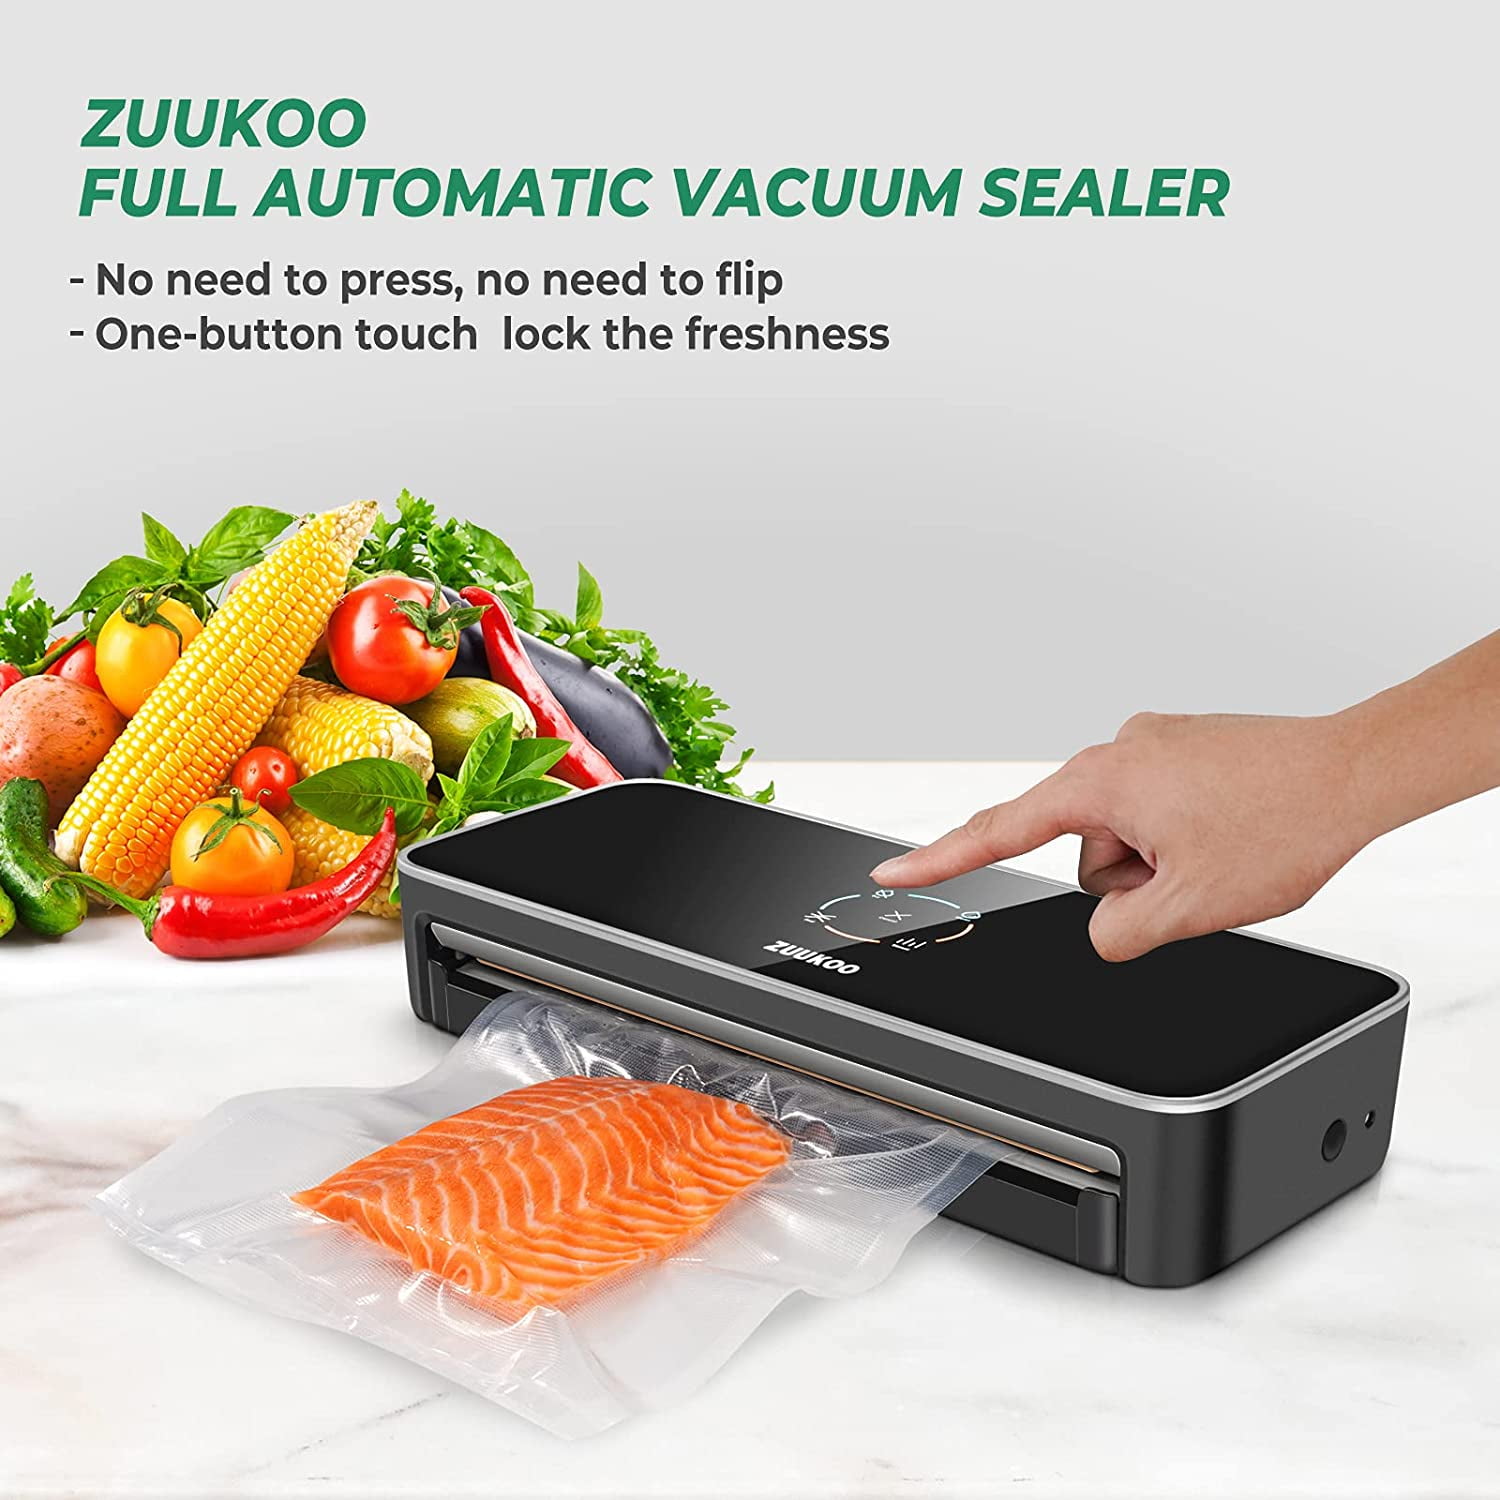 JOSOBO Food Vacuum Sealer Machine, Vacuum Sealer for Dry/Moist Food  Storage, Compact Air Sealer Machine with Powerful Suction, Built-in Cutter